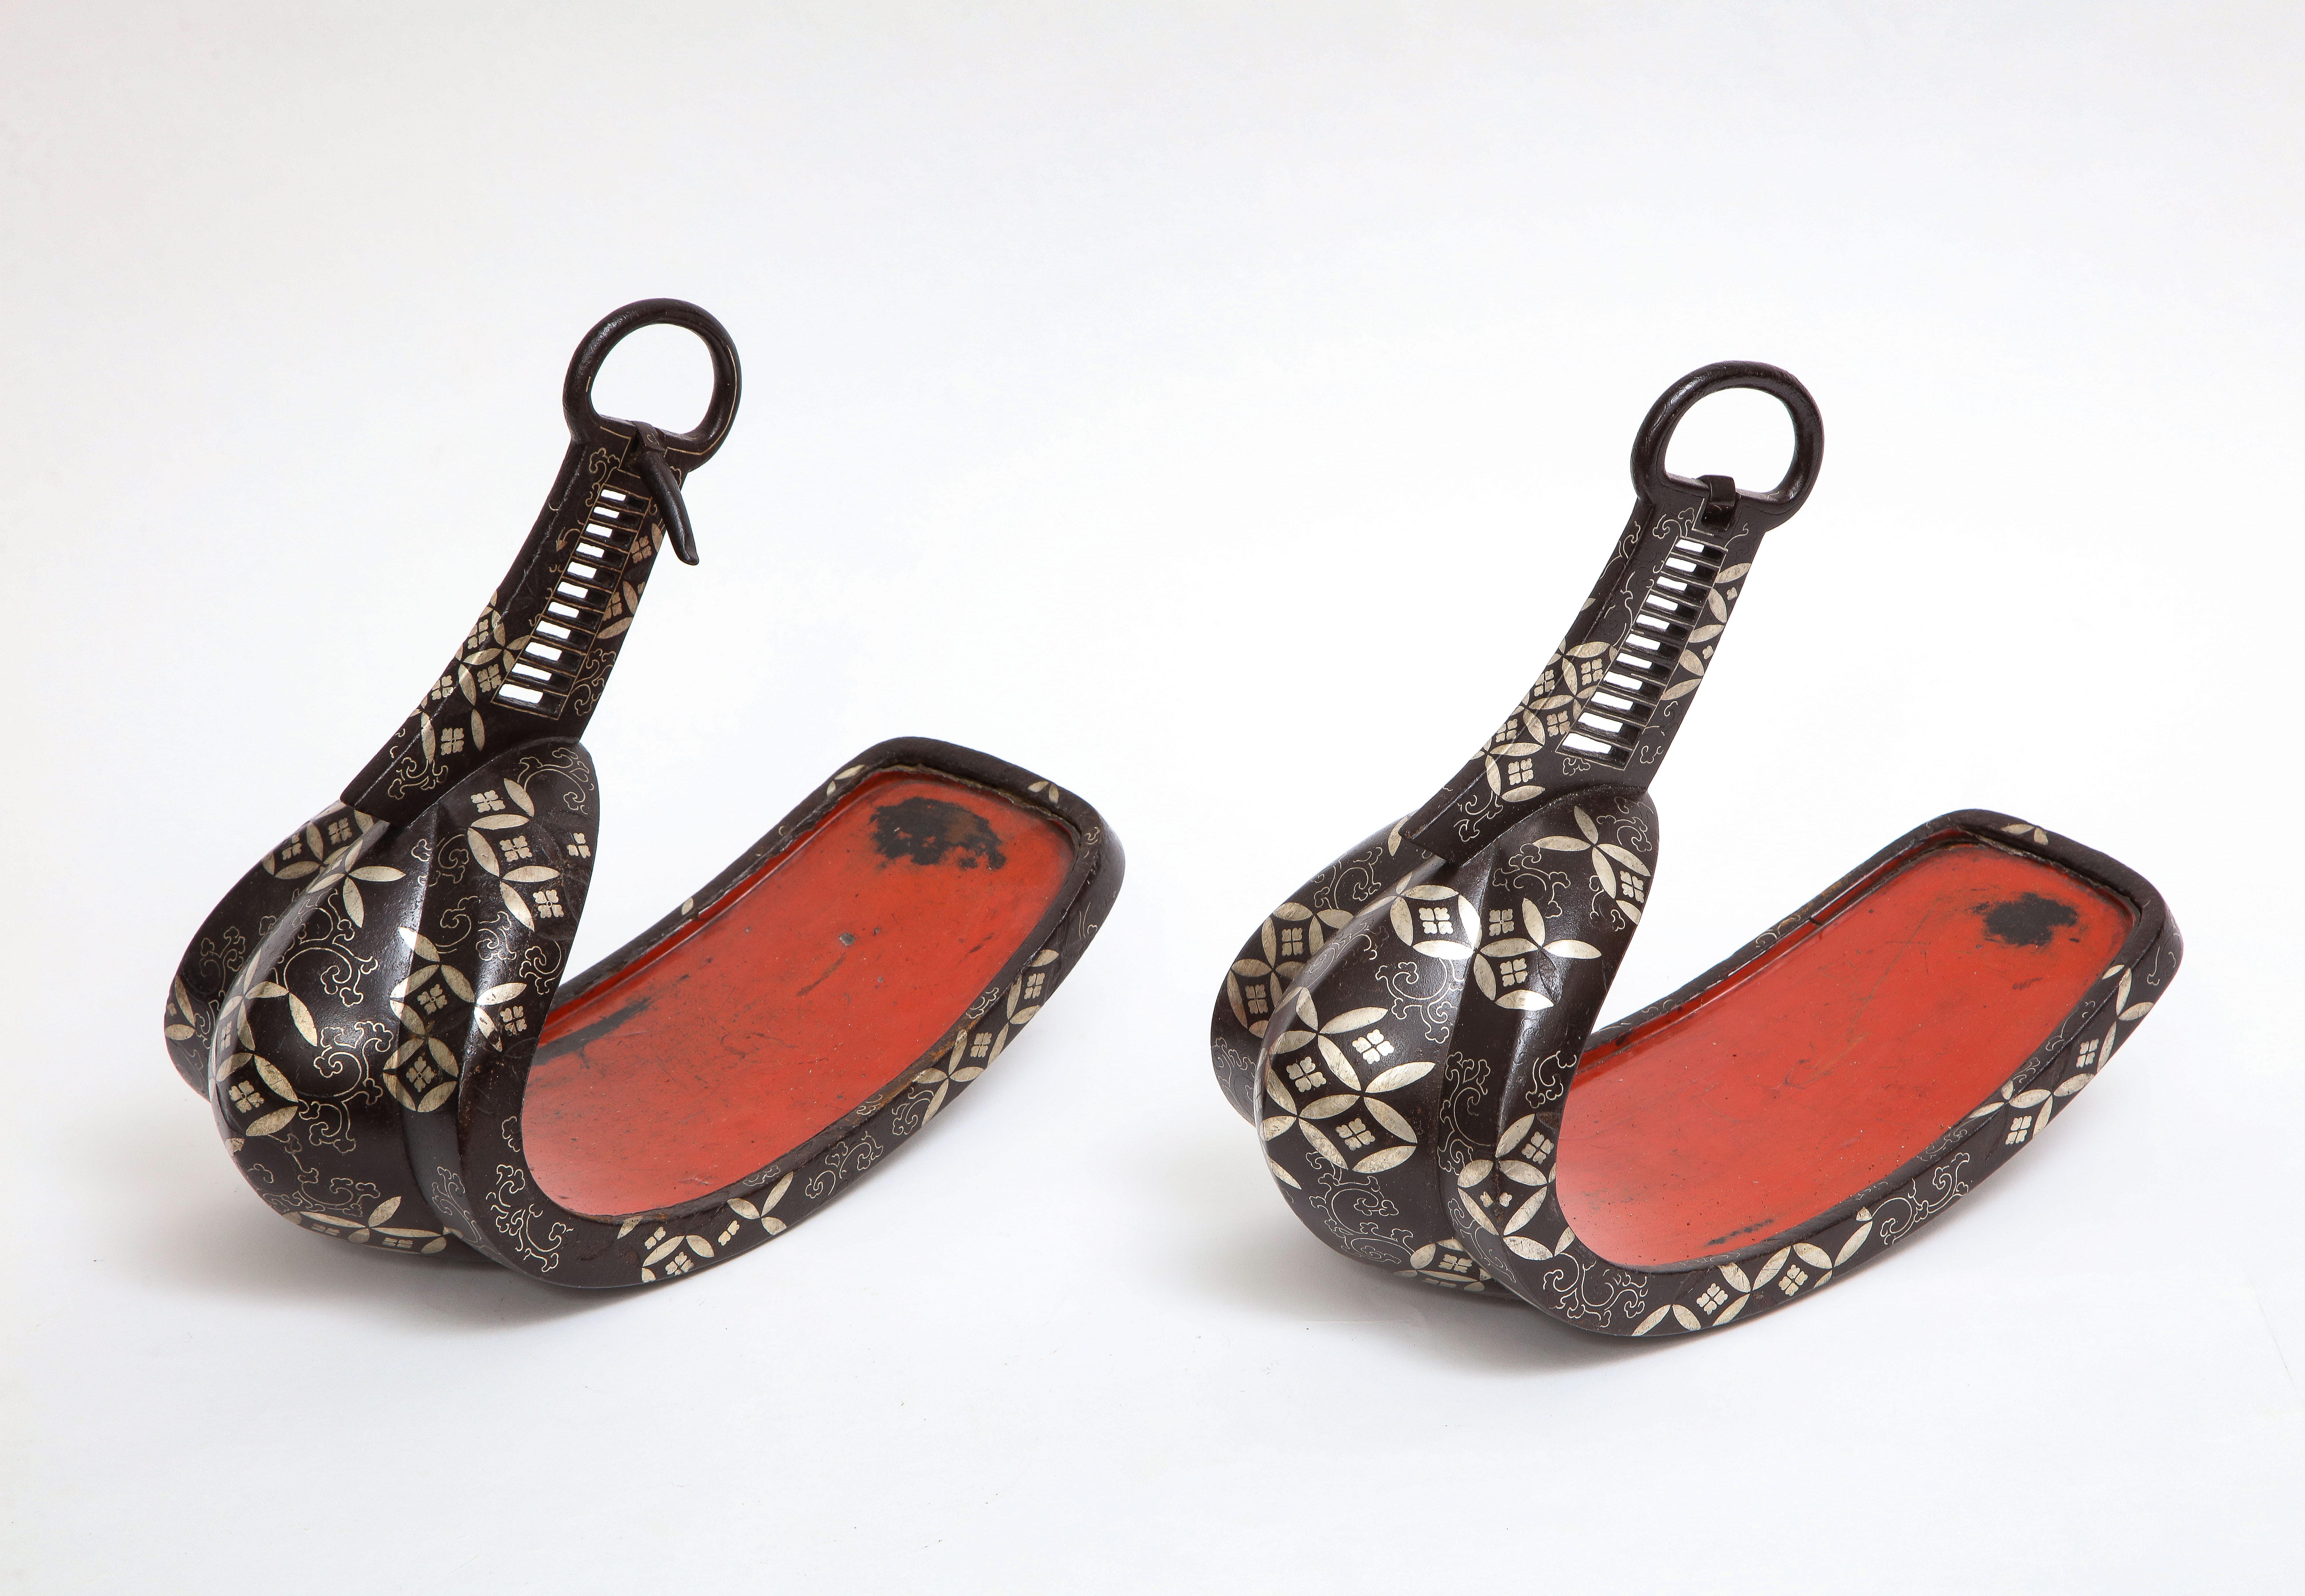 A Pair of Japanese Edo Period (1603–1867) iron, silver inlaid, and red lacquered stirrups (Abumi). Each of typical form, made of iron with silver inlay on the front with floral blossoms borne on leafy vines, with silver inlaid clouds underneath. The